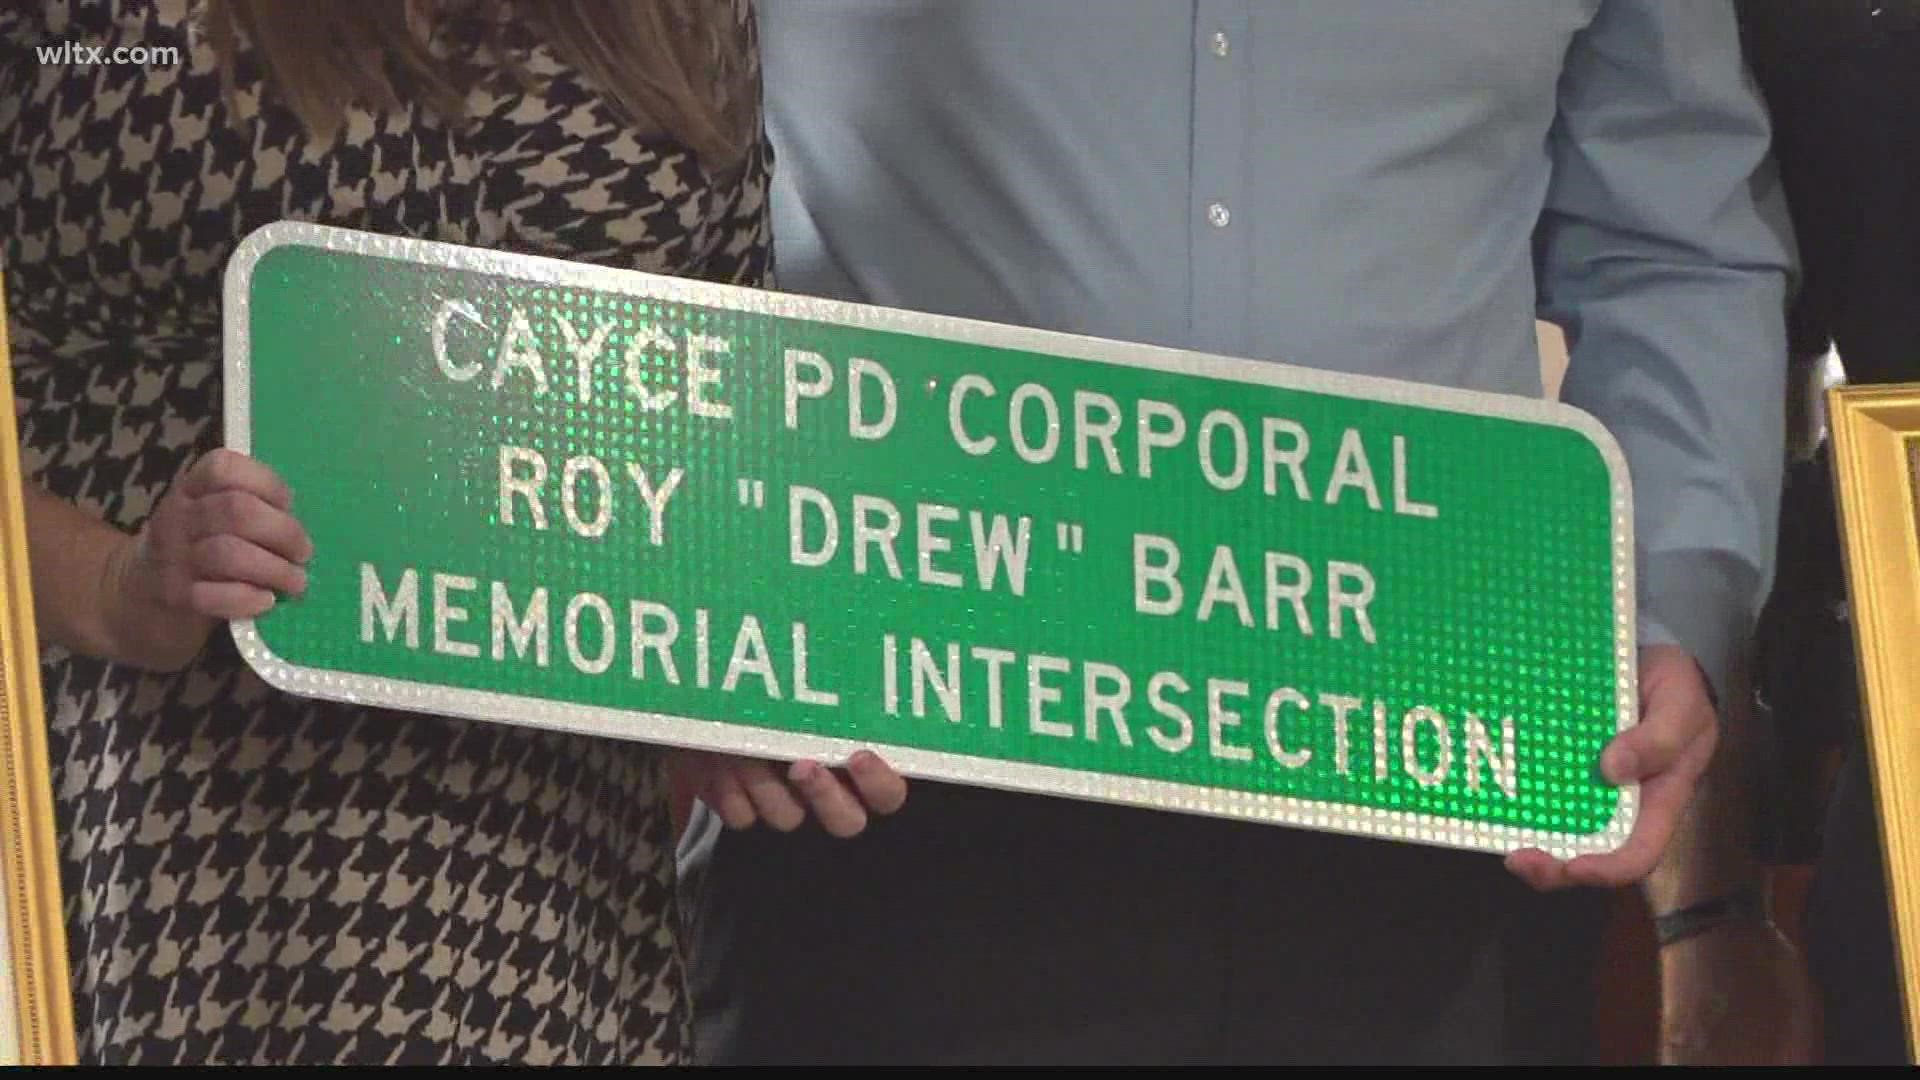 The change comes after the South Carolina Department of Transportation's approval to name an intersection after the fallen officer.